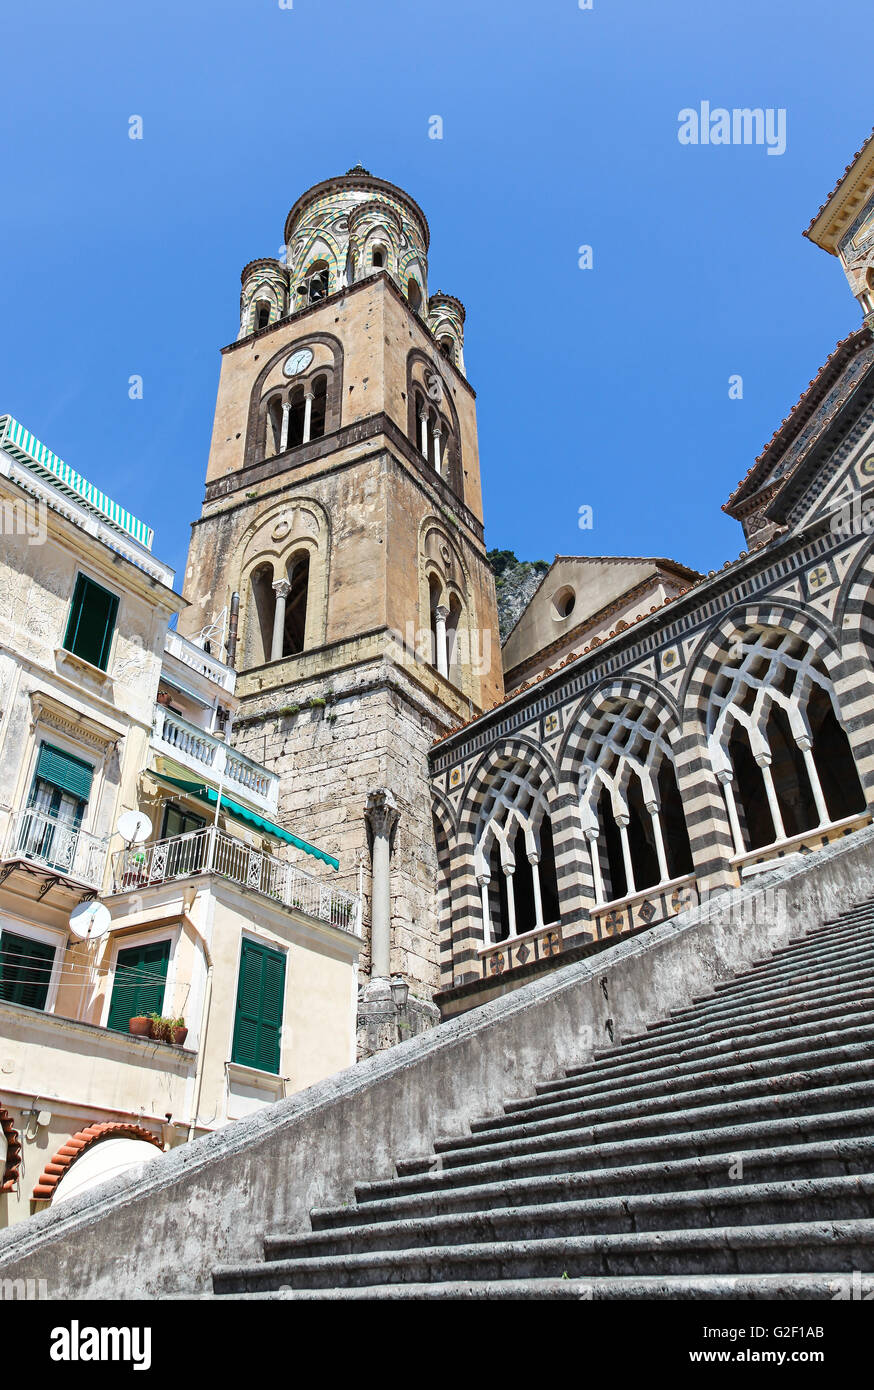 Amalfi Cathedral bell tower and steps leading up to the cloisters Amalfi coast Italy europe Stock Photo